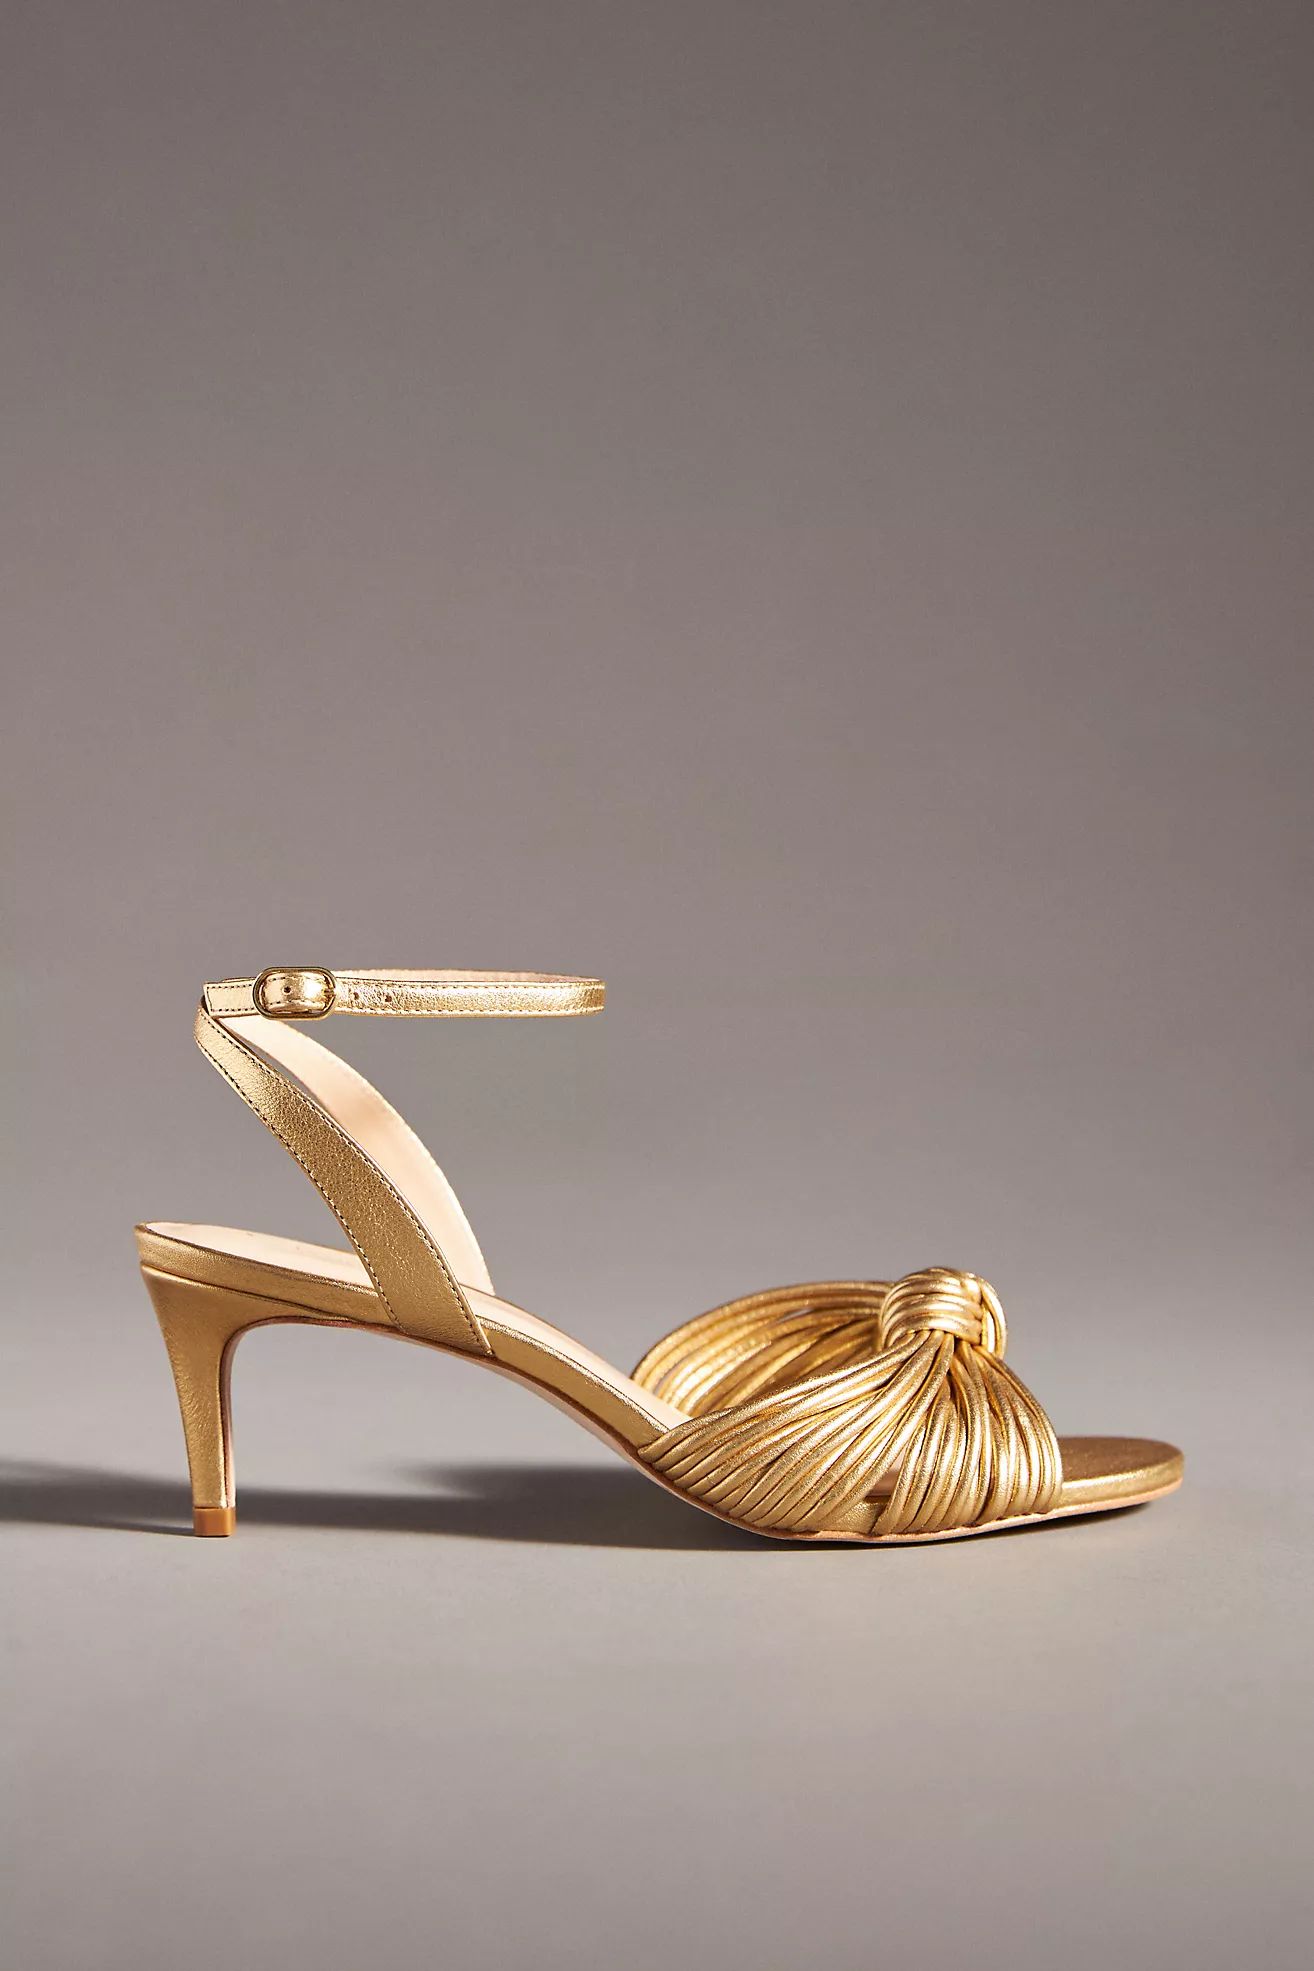 By Anthropologie Knotted Heels | Anthropologie (US)